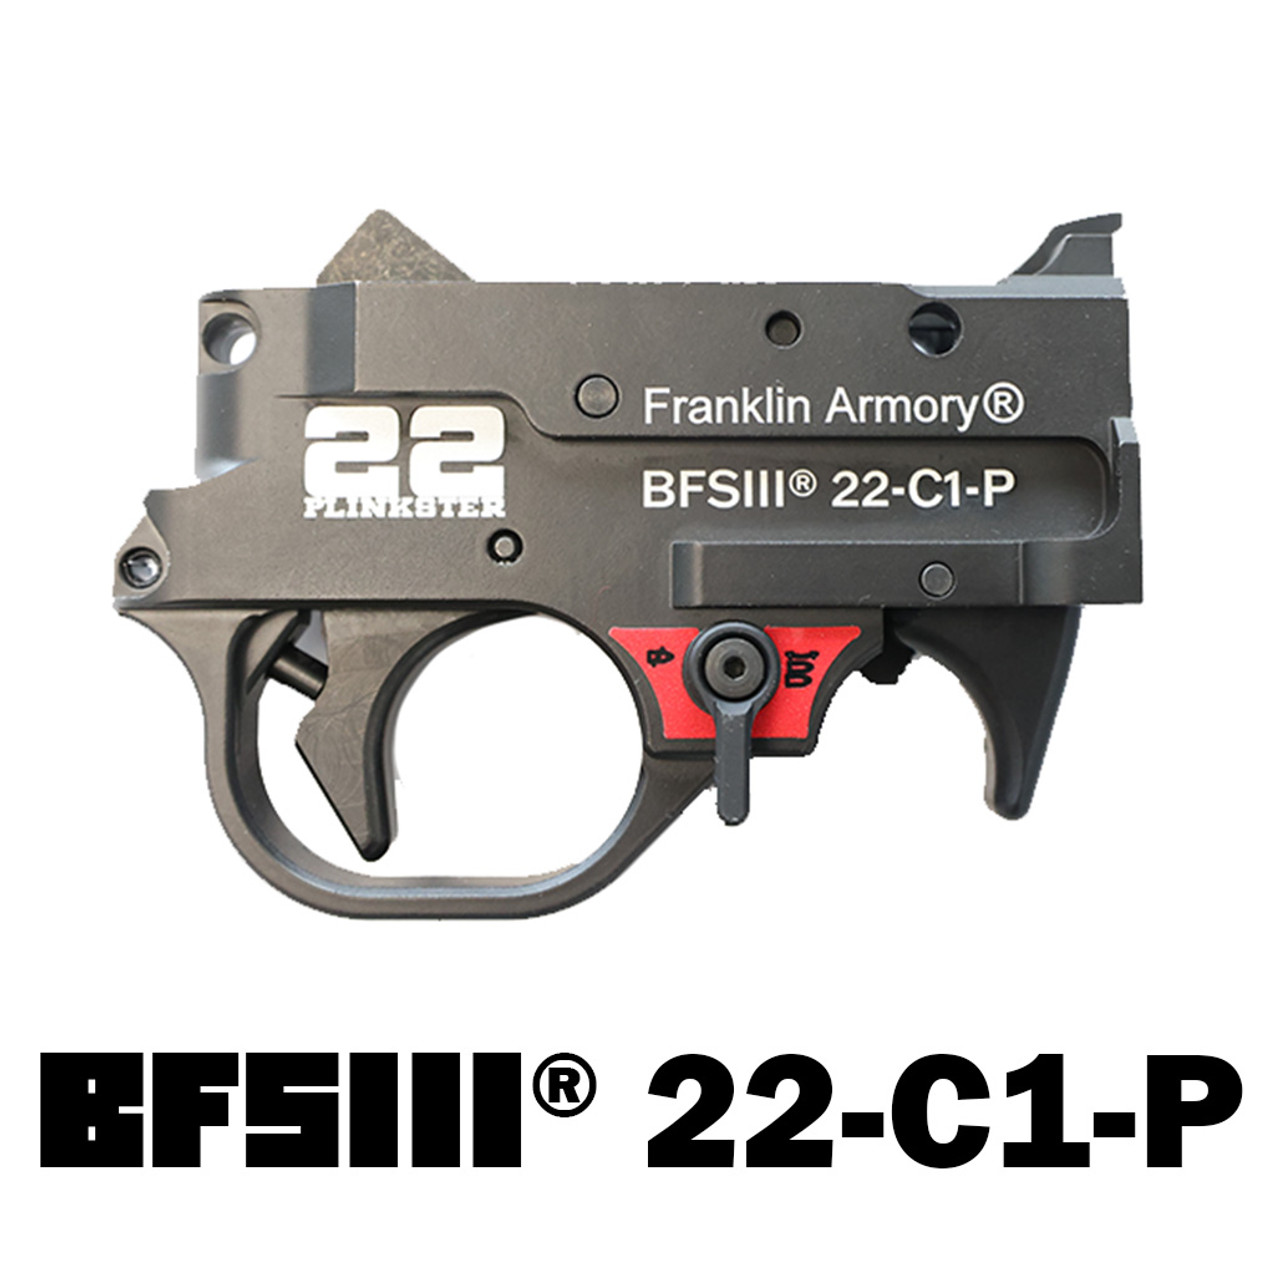 New 22plinkster Edition Binary Trigger from Franklin Armory